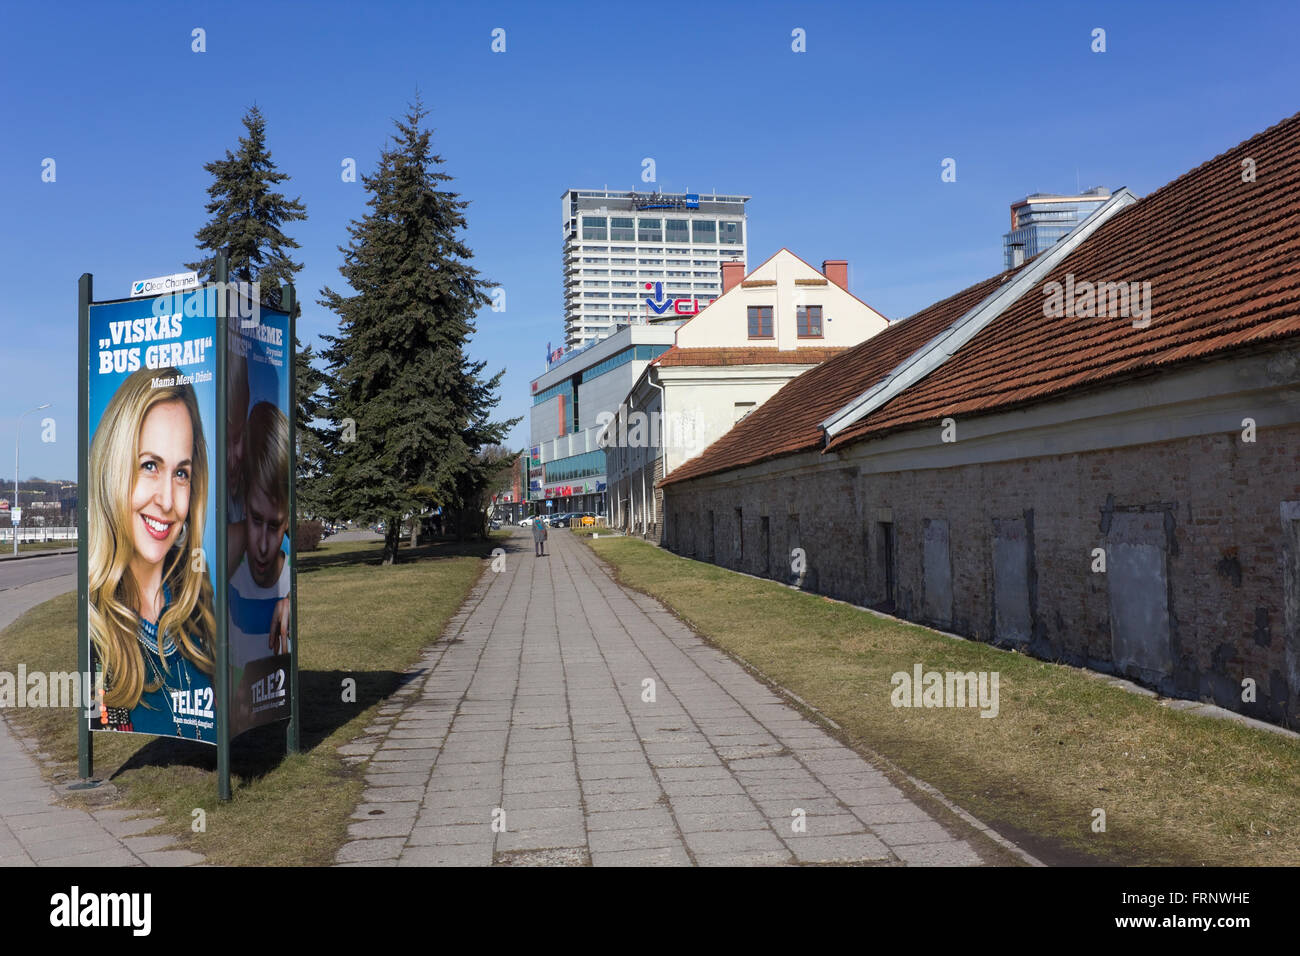 VILNIUS, LITHUANIA - MARCH 13, 2016: The building of the central department store CUP,  Radisson hotel and billboard of the new Stock Photo